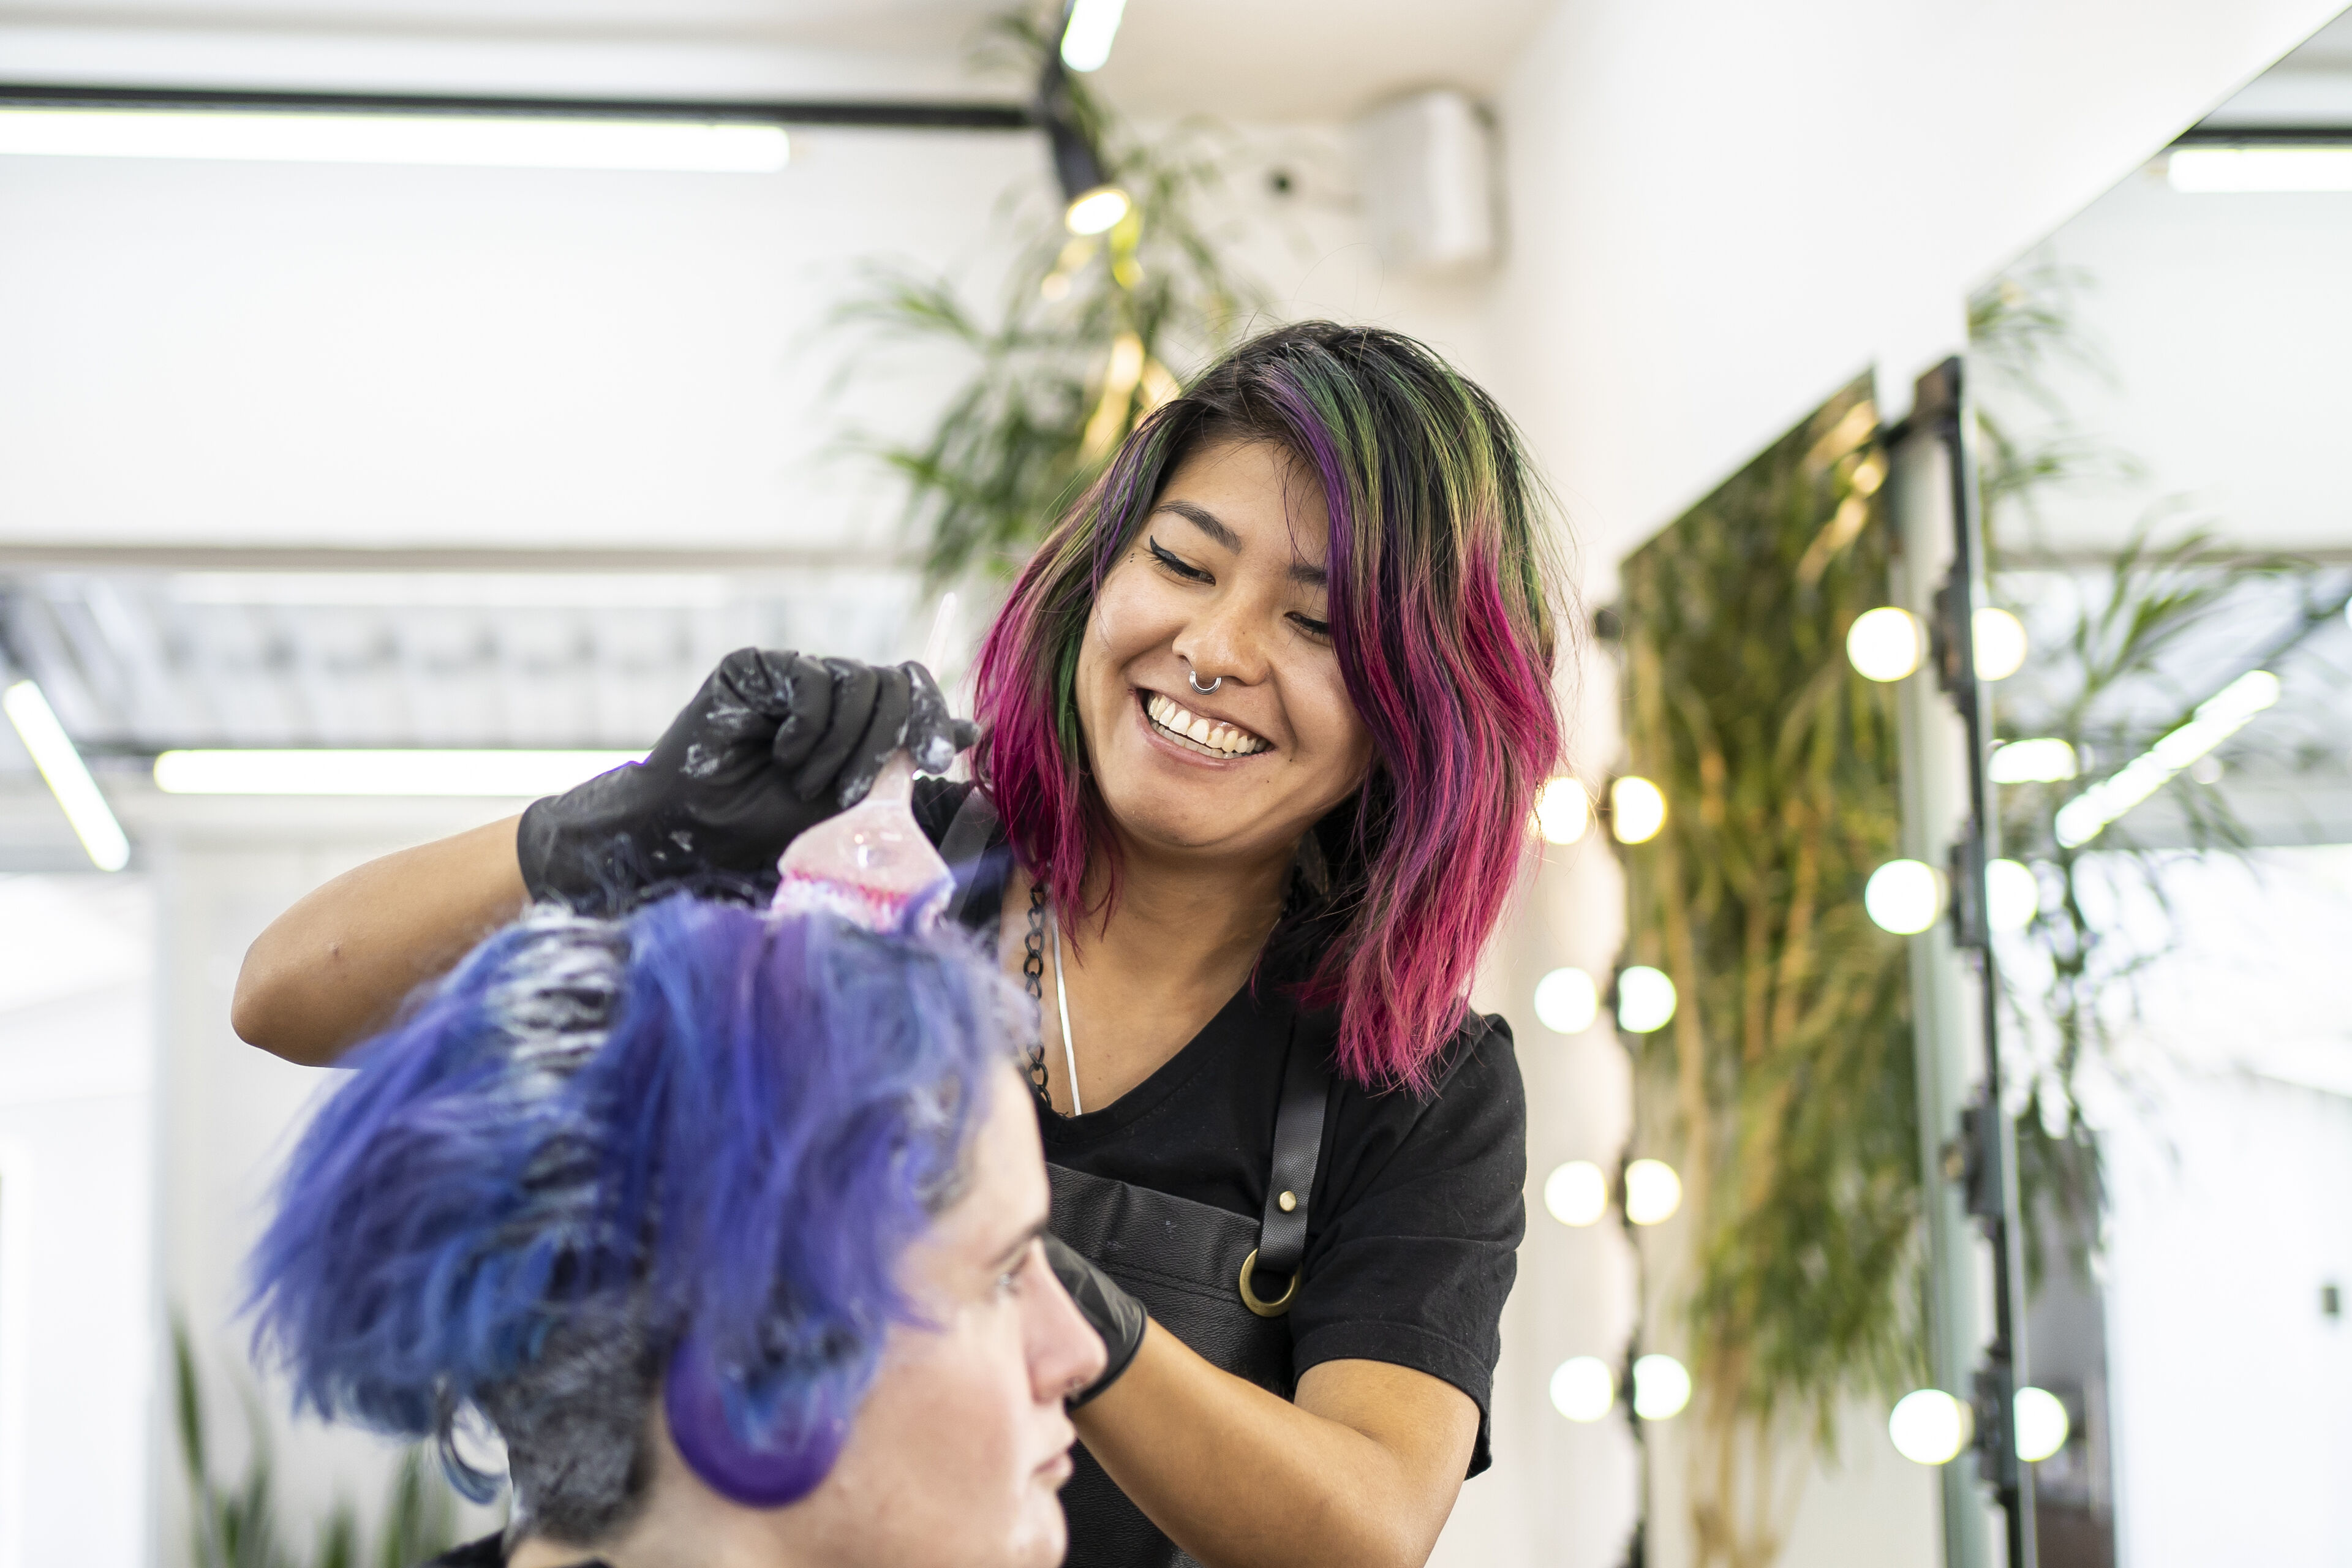 A smiling hair colorist with vibrant pink hair applies dye to a client's blue hair in a bright salon.